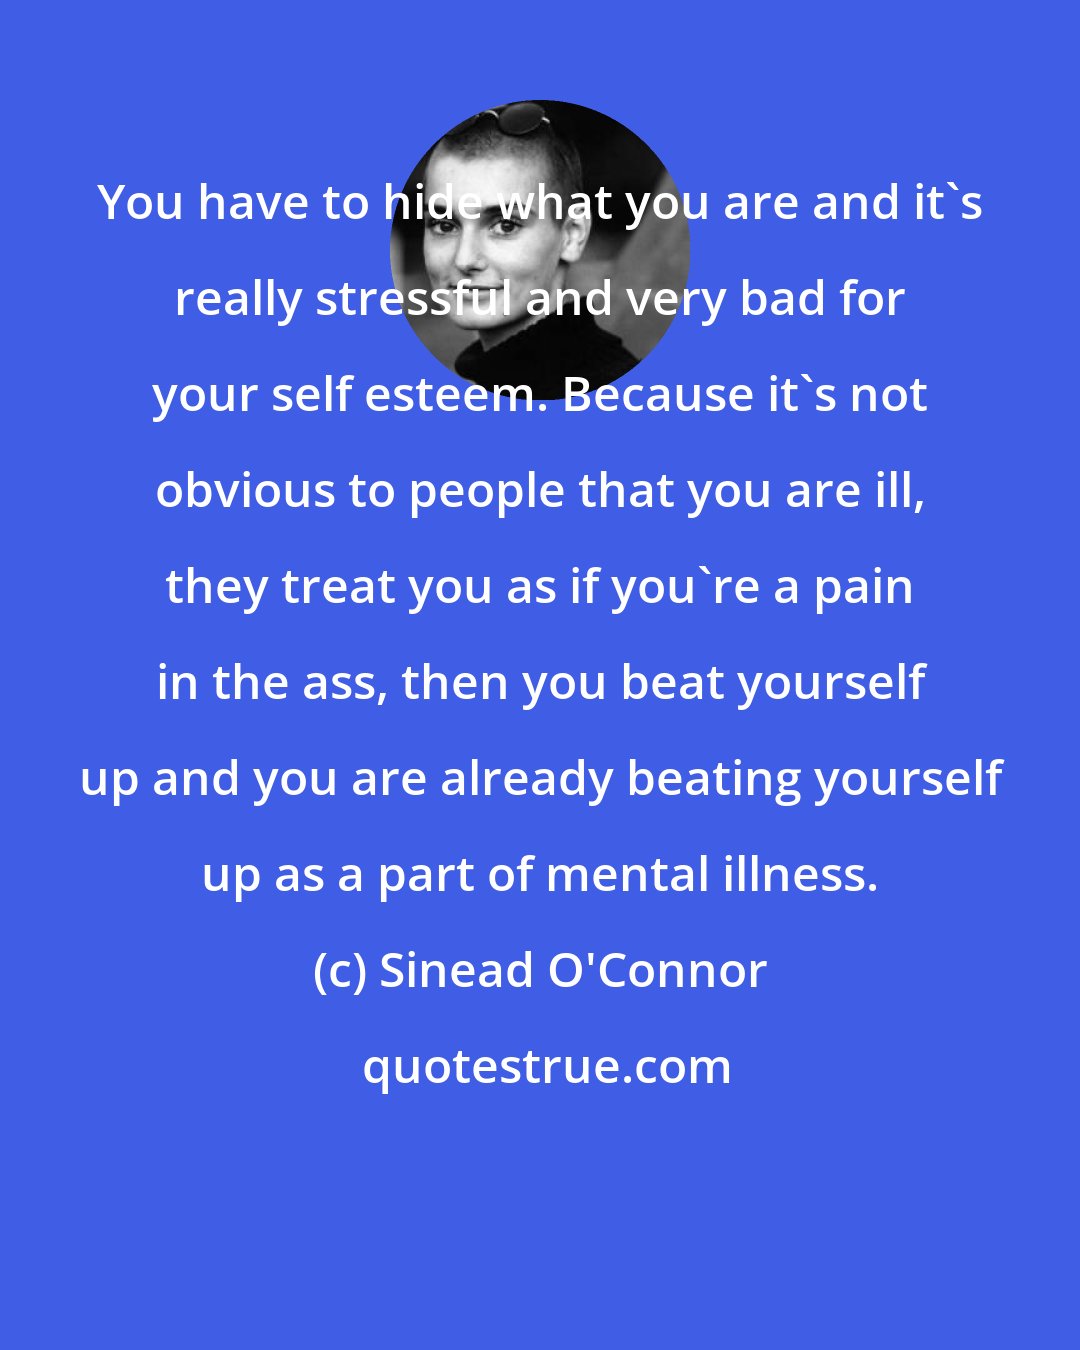 Sinead O'Connor: You have to hide what you are and it's really stressful and very bad for your self esteem. Because it's not obvious to people that you are ill, they treat you as if you're a pain in the ass, then you beat yourself up and you are already beating yourself up as a part of mental illness.